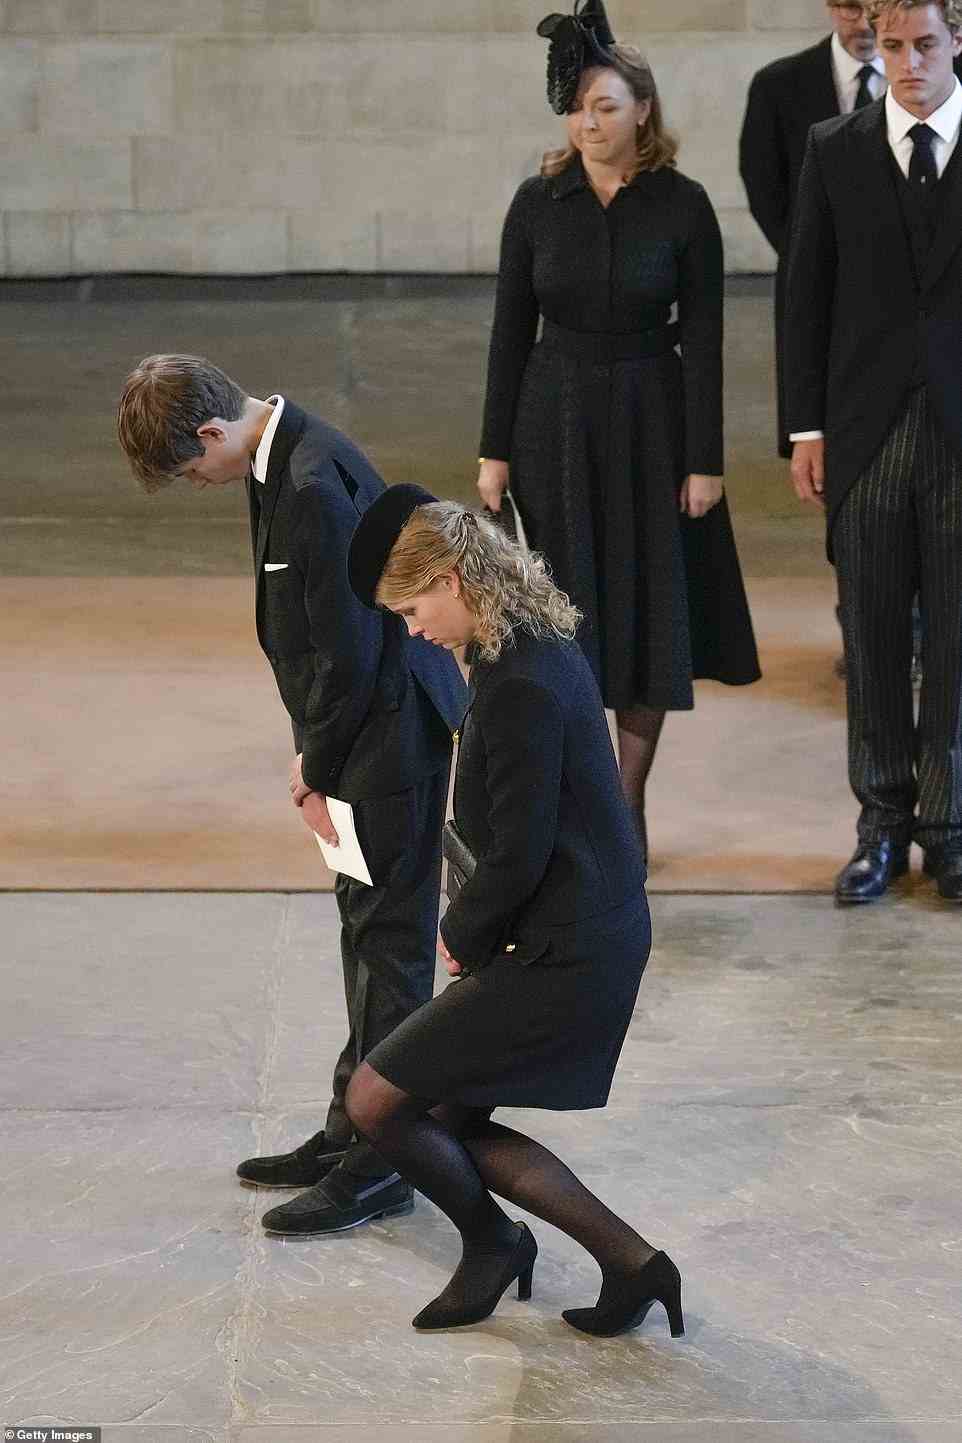 James, Viscount Severn and Lady Louise Windsor pay their respects to the Queen